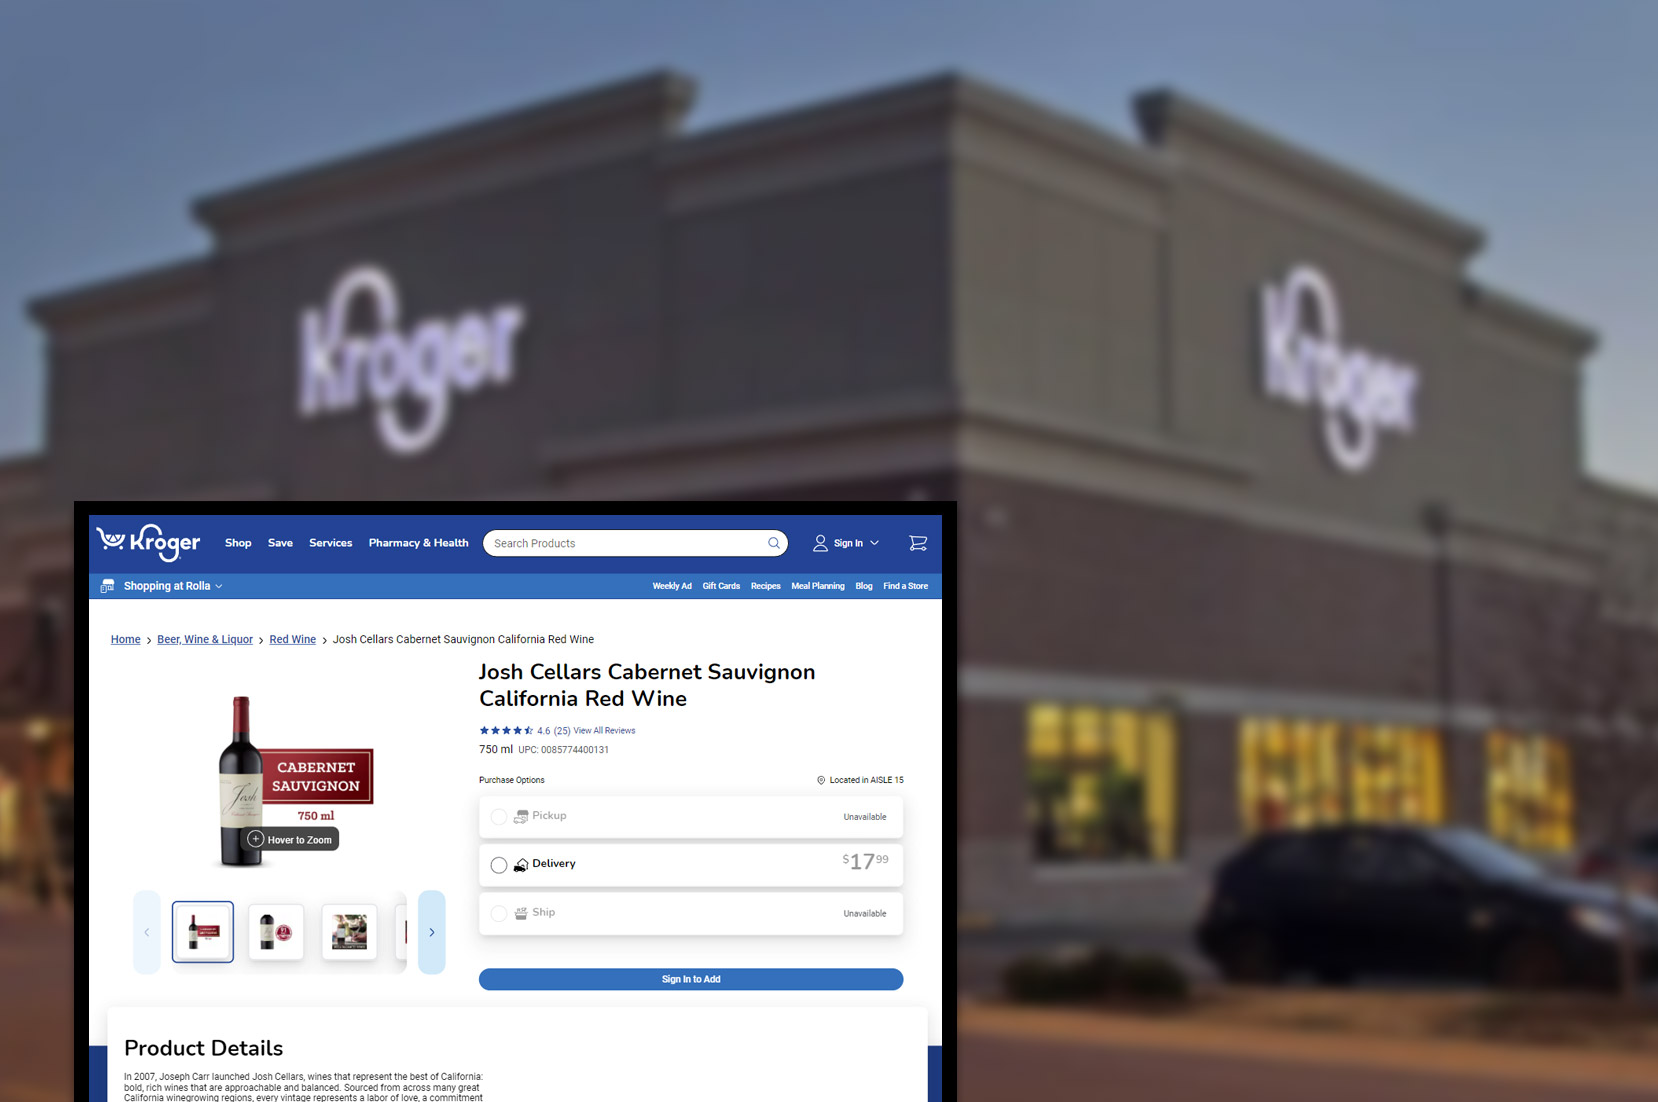 kroger-comproduct-pricing-information-and-image-scraping-services